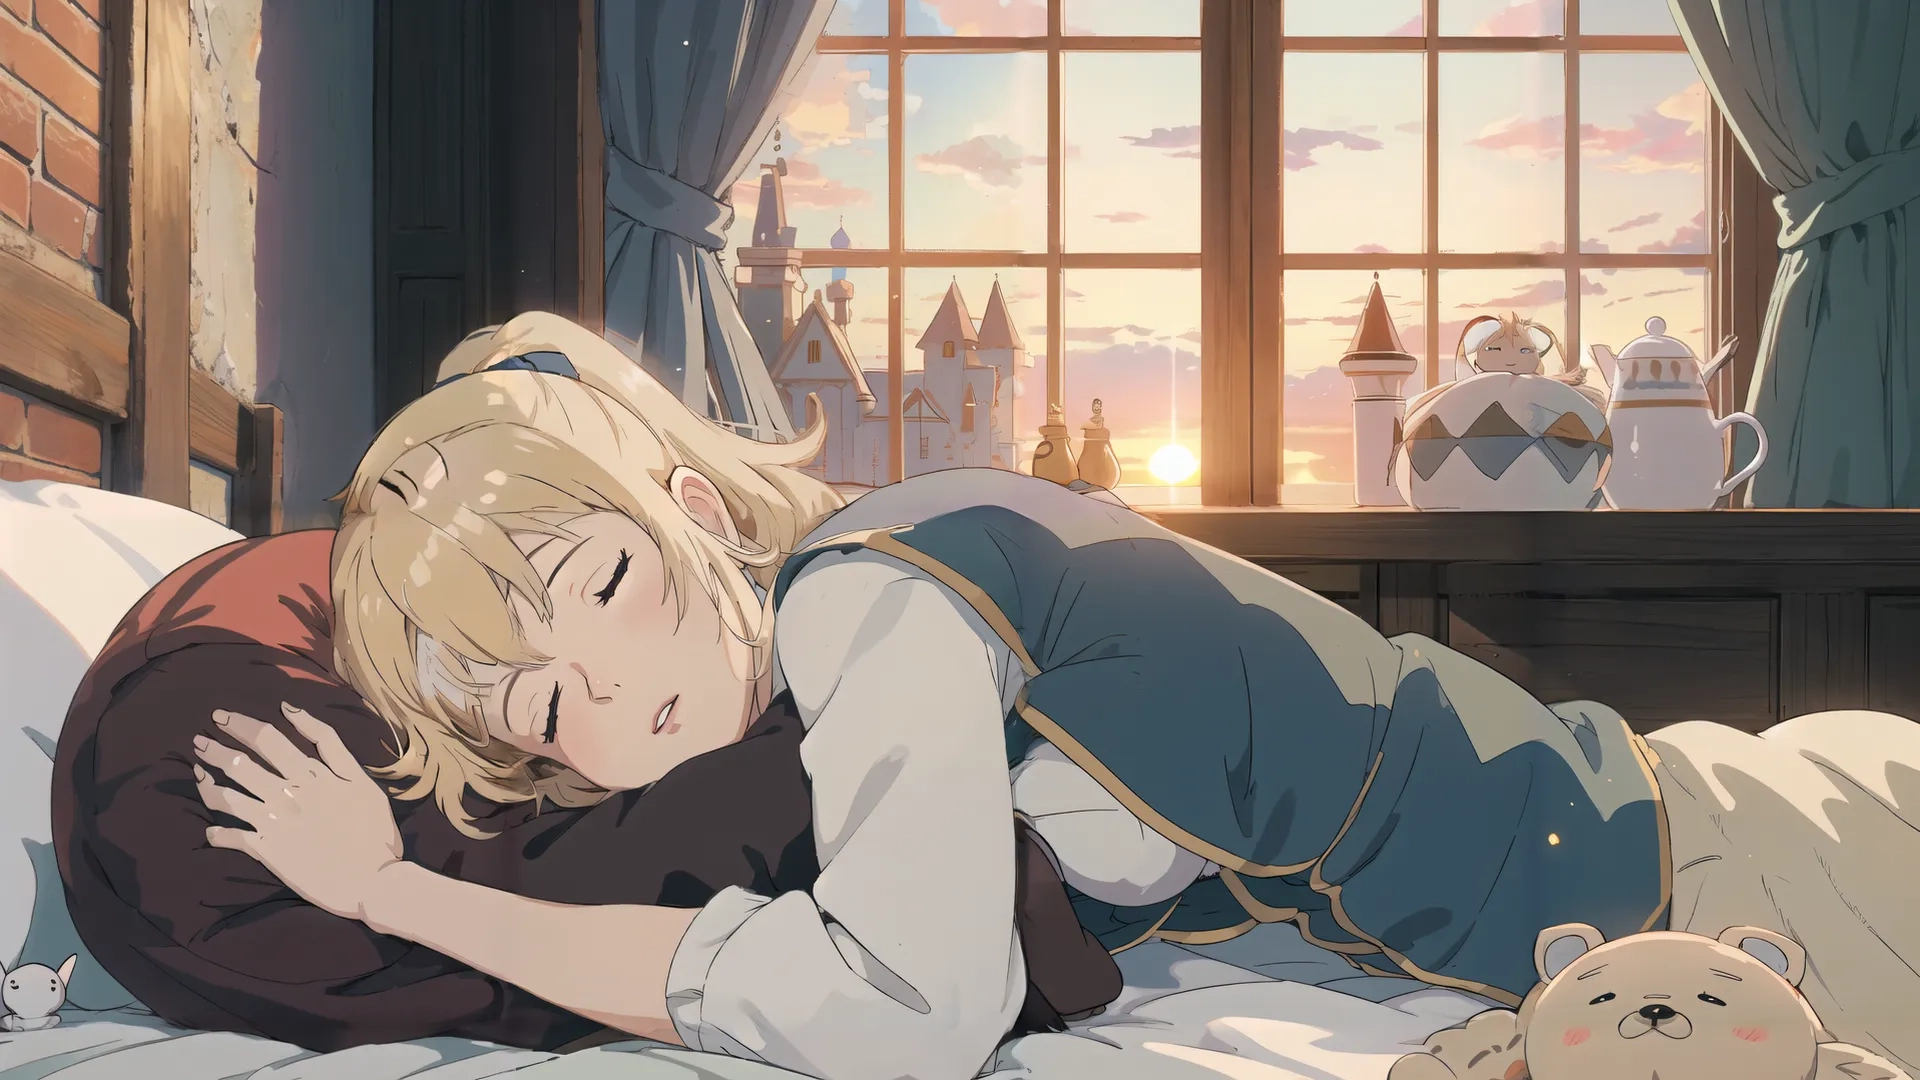 there is a girl that is laying in bed hugging a teddy bear, with some snow capped mountains outside her window behind her, in the background is a backdrop
